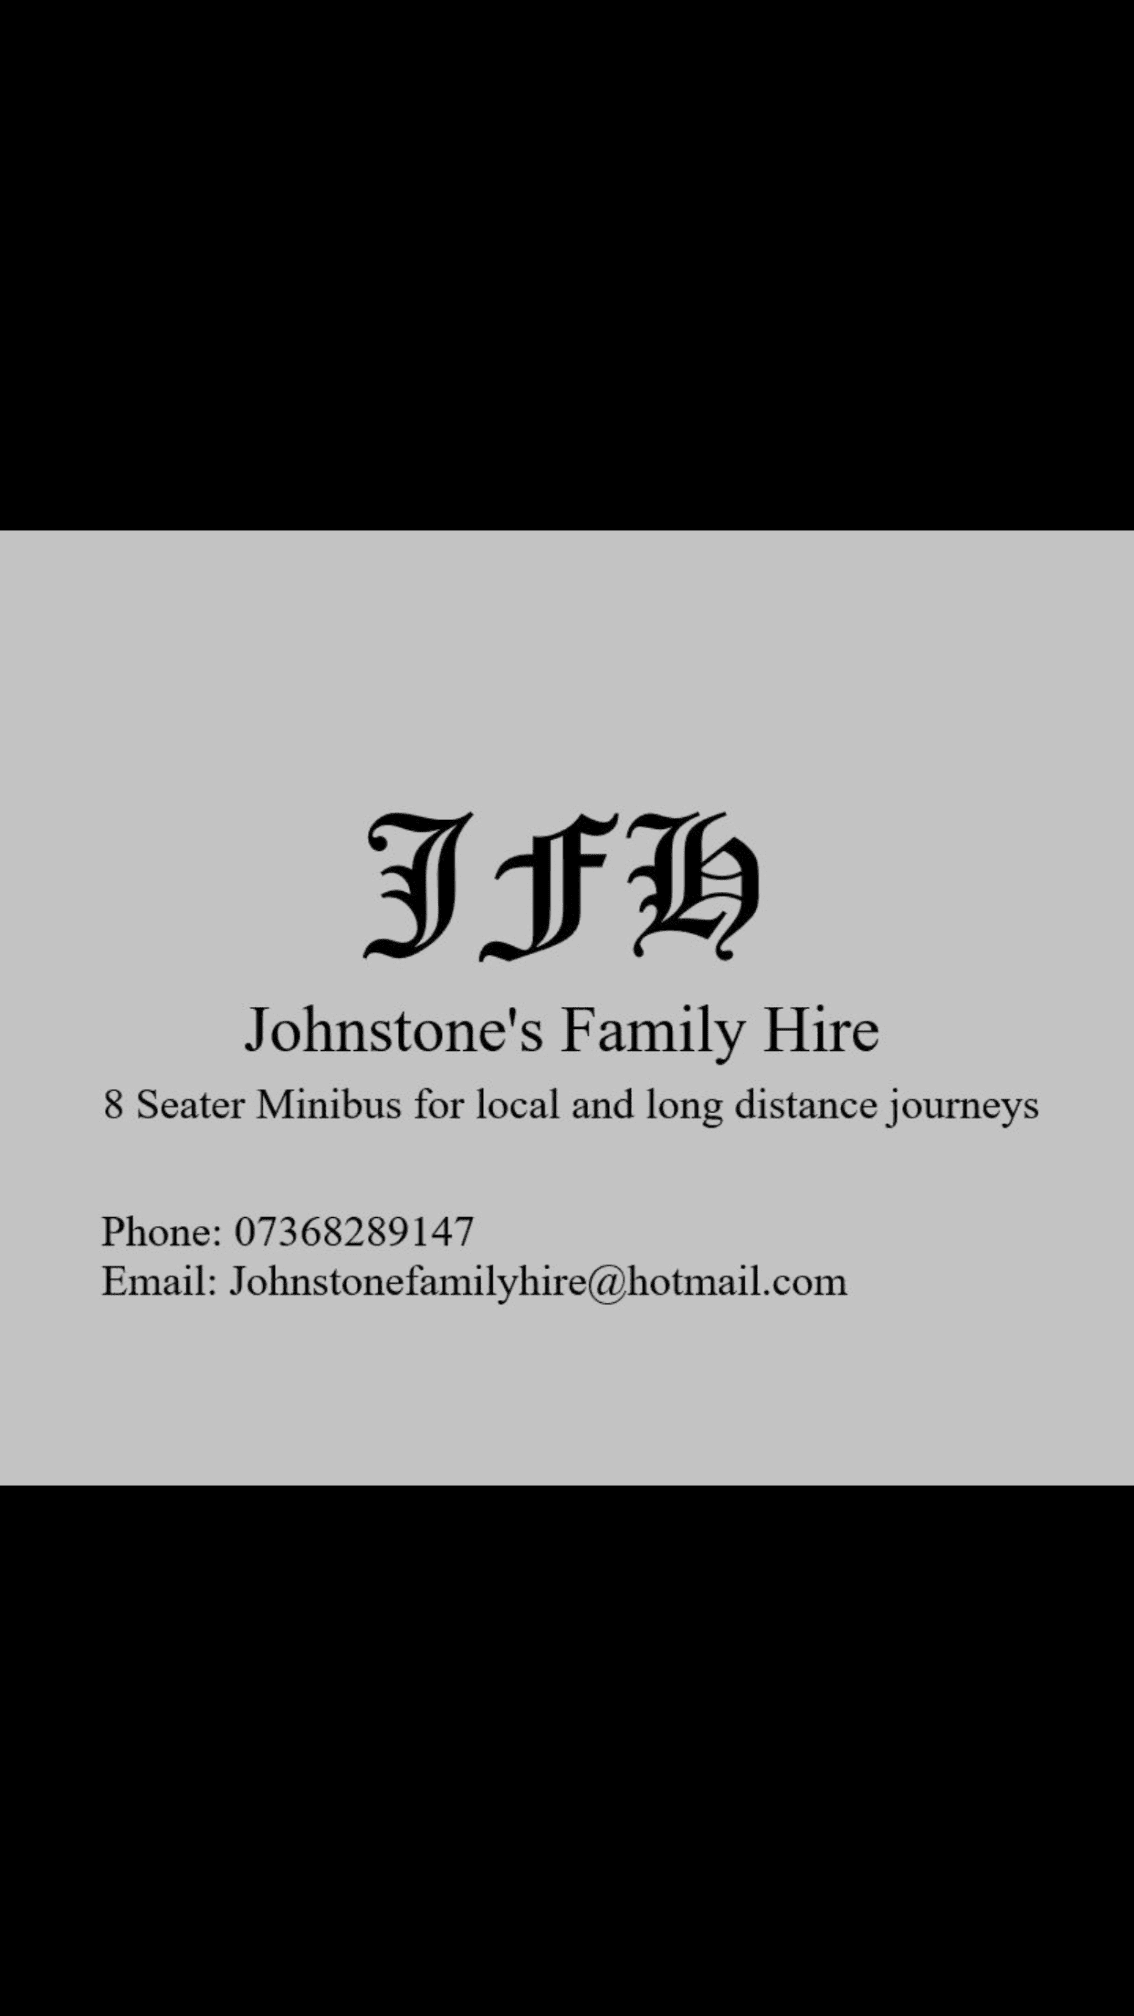 Images Johnstone Family Hire